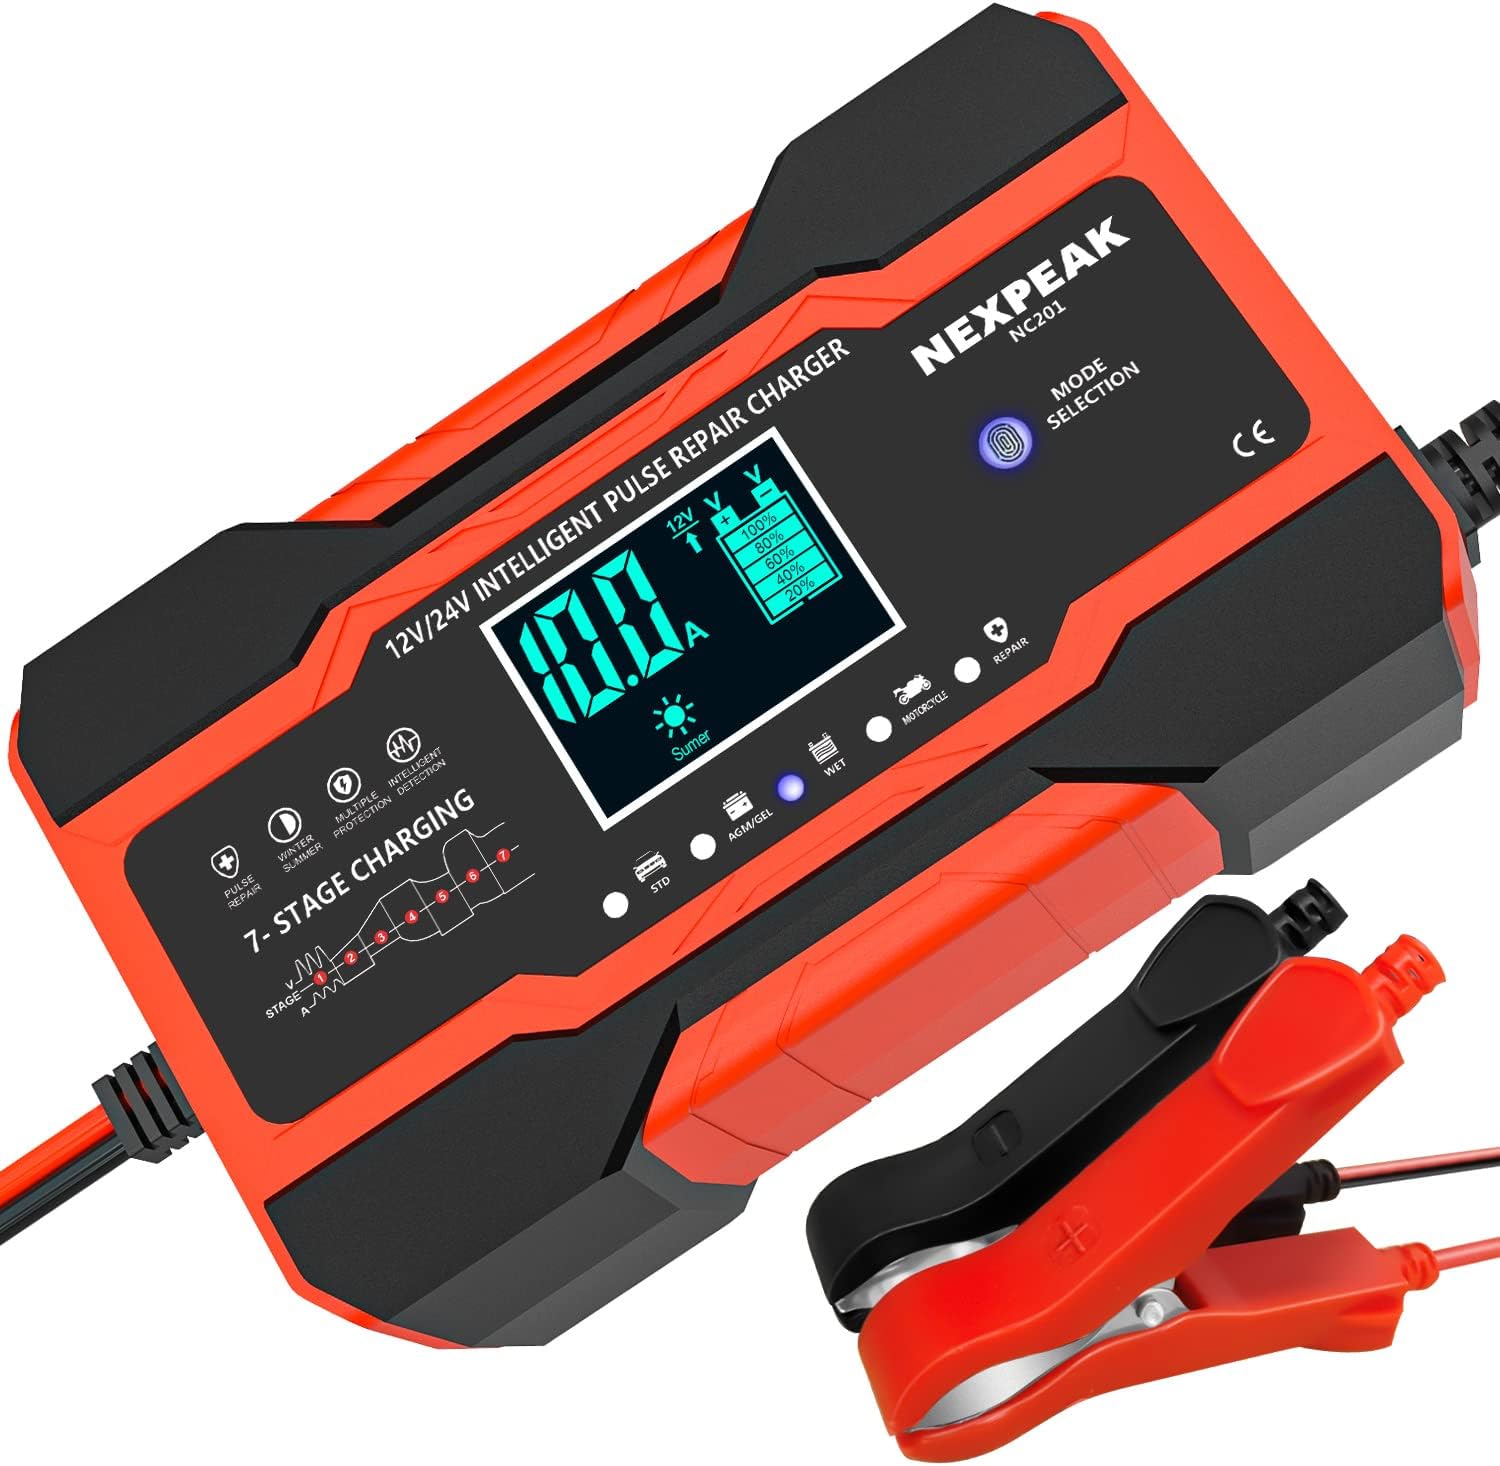 NEXPEAK 10-Amp Smart Battery Charger Review